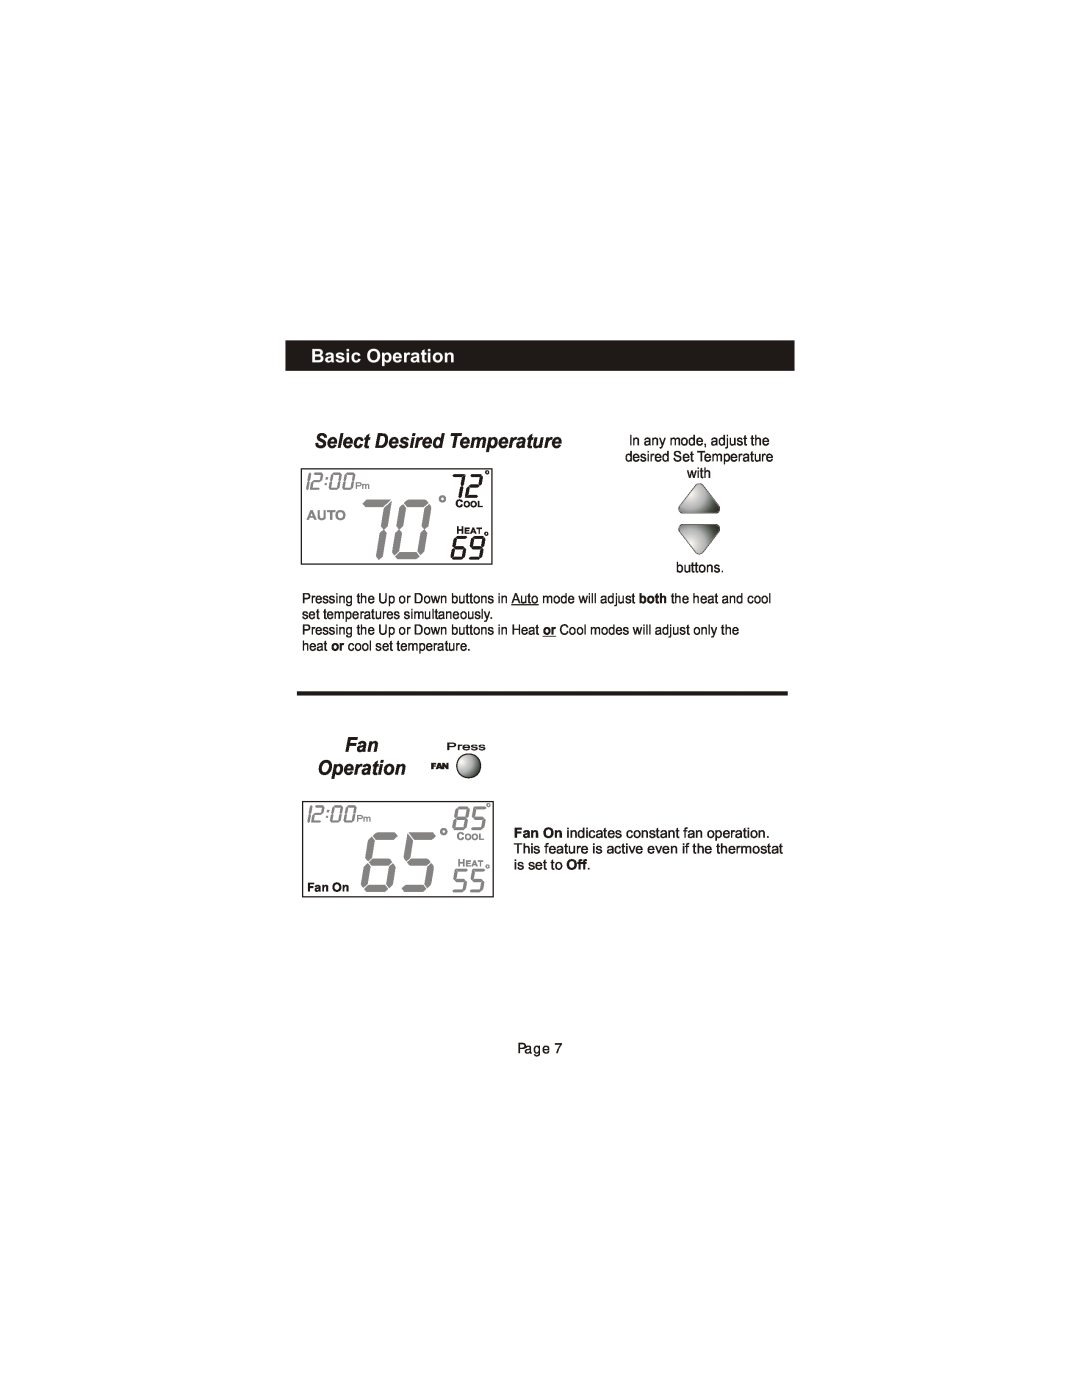 Bryant TSTATBBPS101 manual 1200, Select Desired Temperature, Operation FAN, Basic Operation 